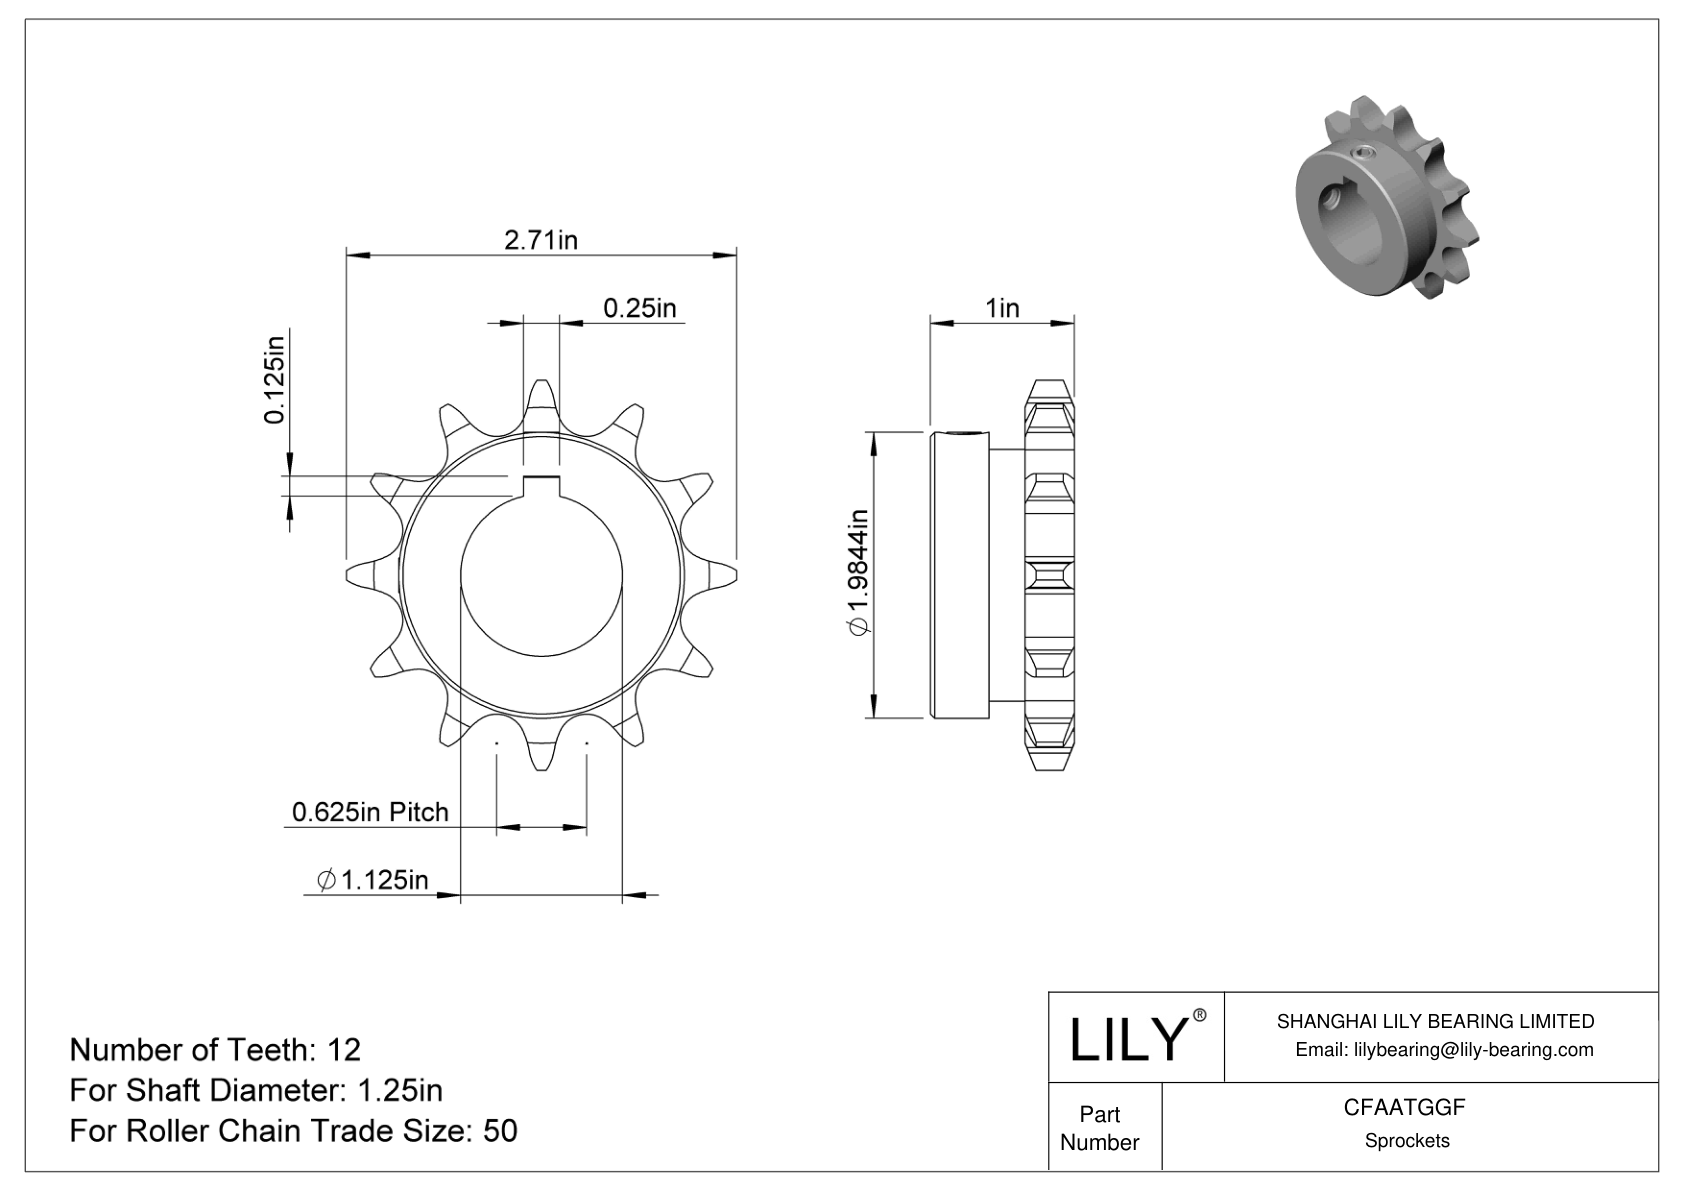 CFAATGGF Wear-Resistant Sprockets for ANSI Roller Chain cad drawing